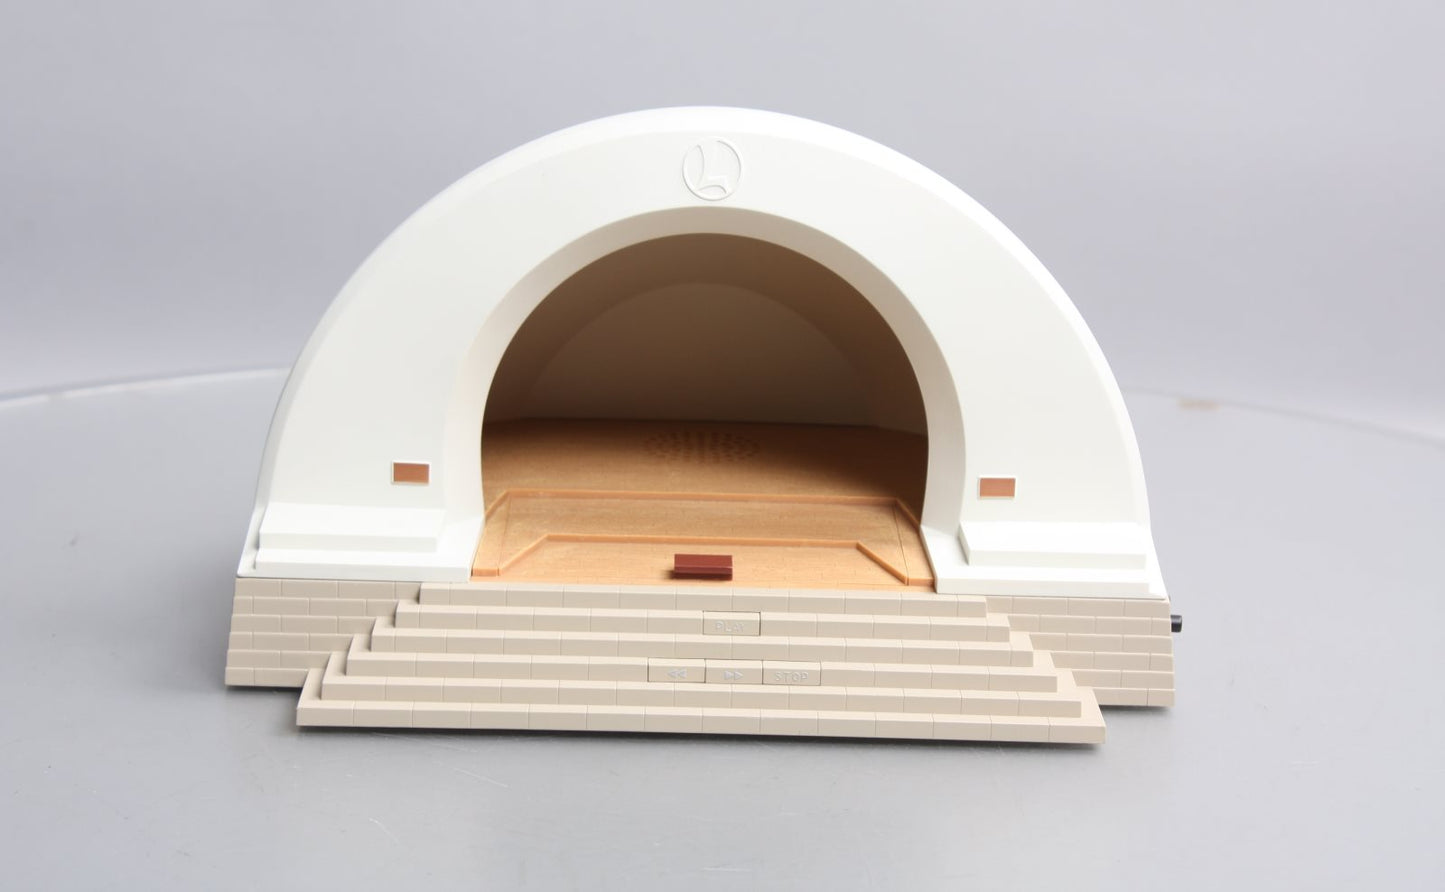 Lionel 6-14164 Lionelville Band Shell EX/Box